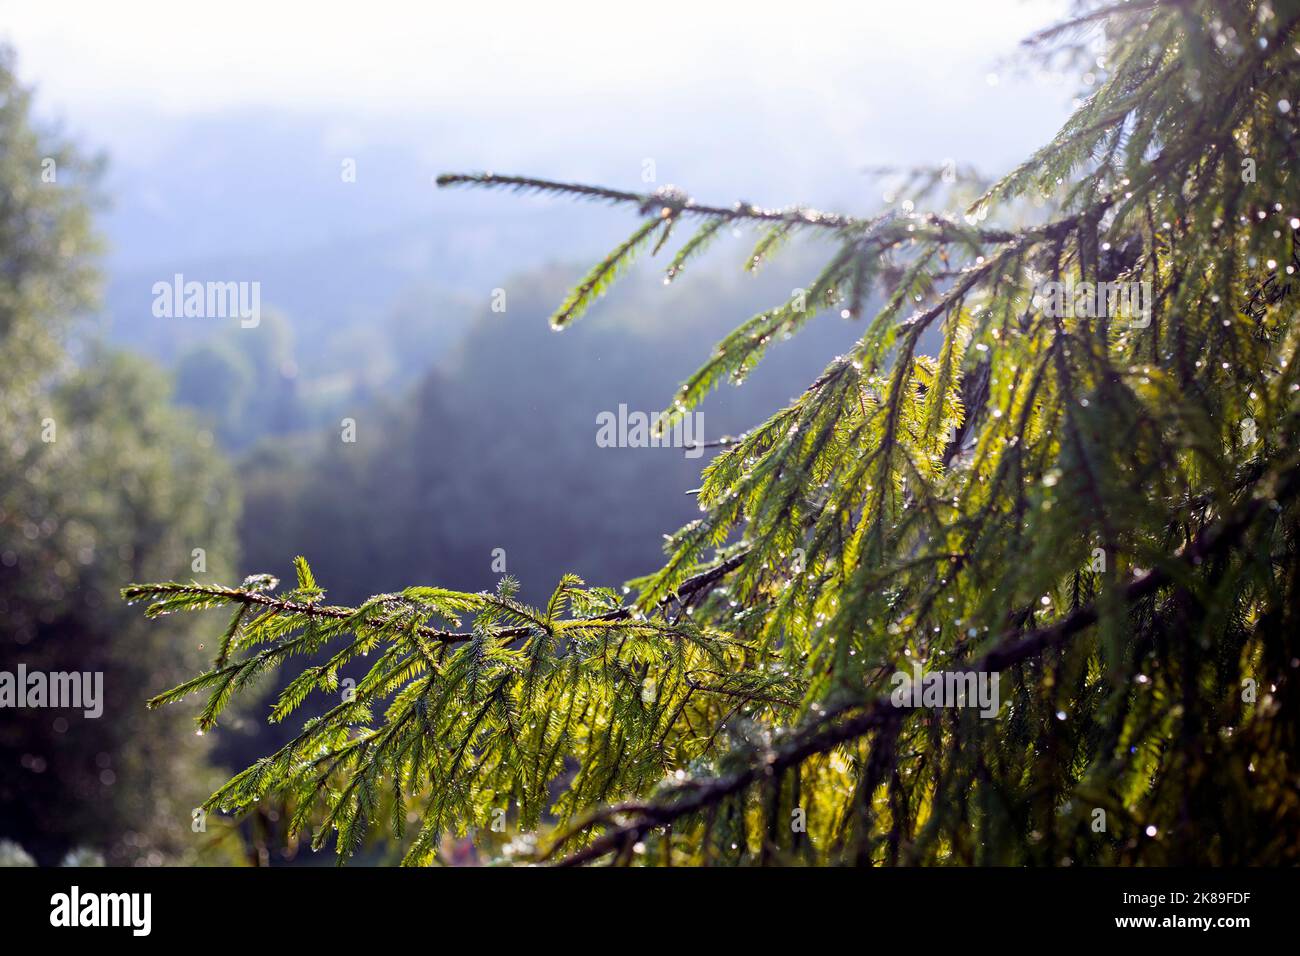 beautiful background - spruce branch against the backdrop of mountains Stock Photo